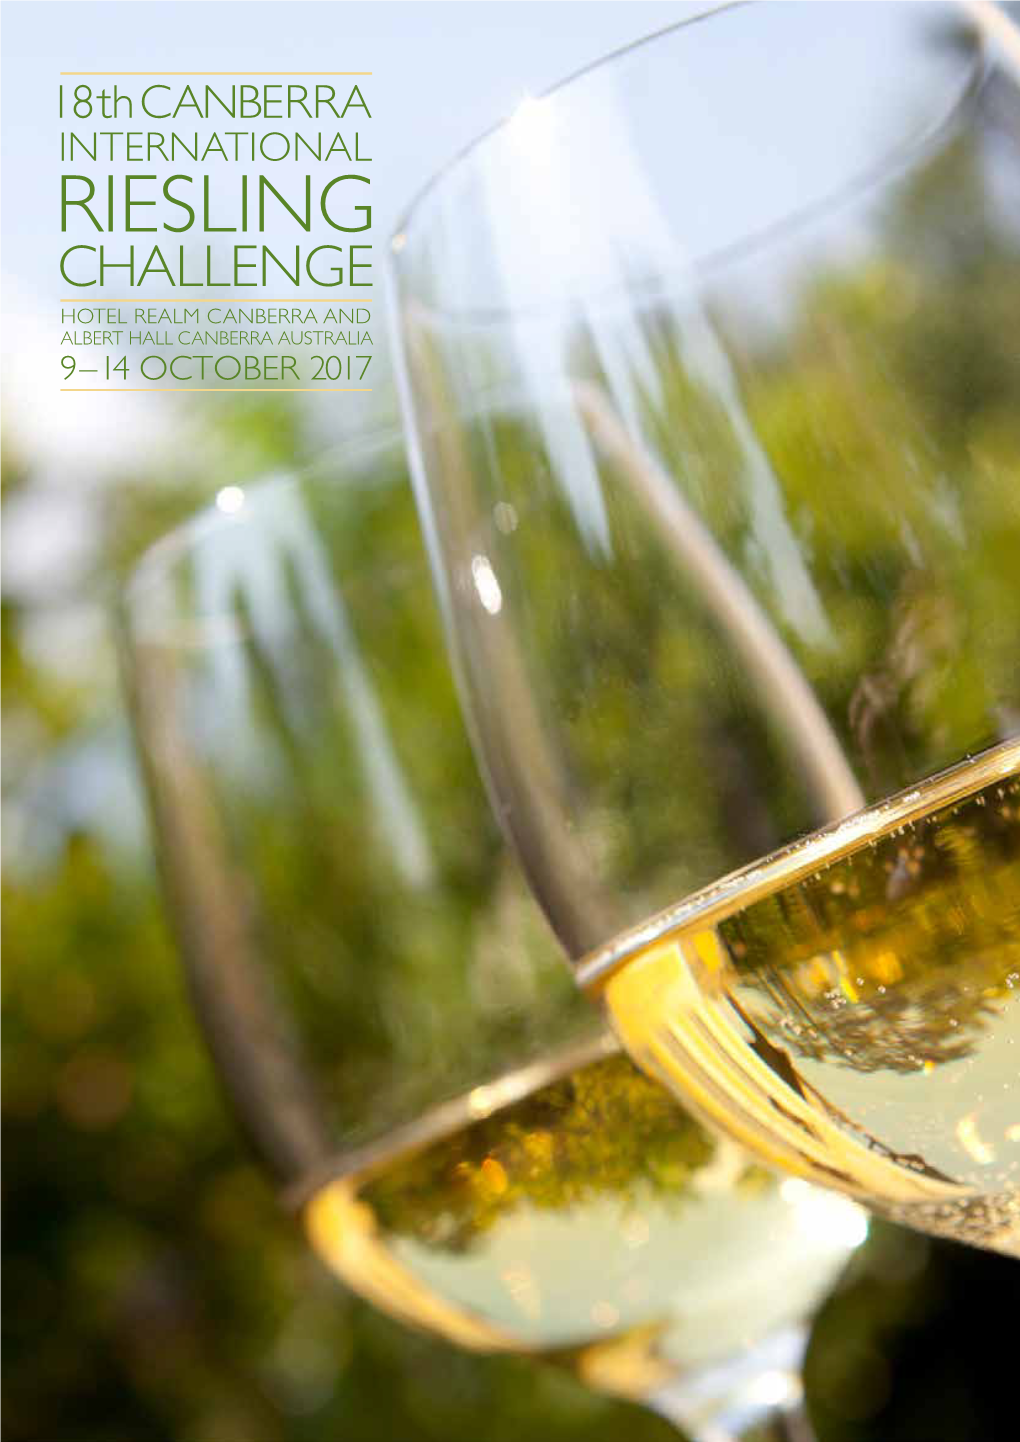 Riesling Challenge Hotel Realm Canberra and Albert Hall Canberra Australia 9 – 14 October 2017 Canberra International